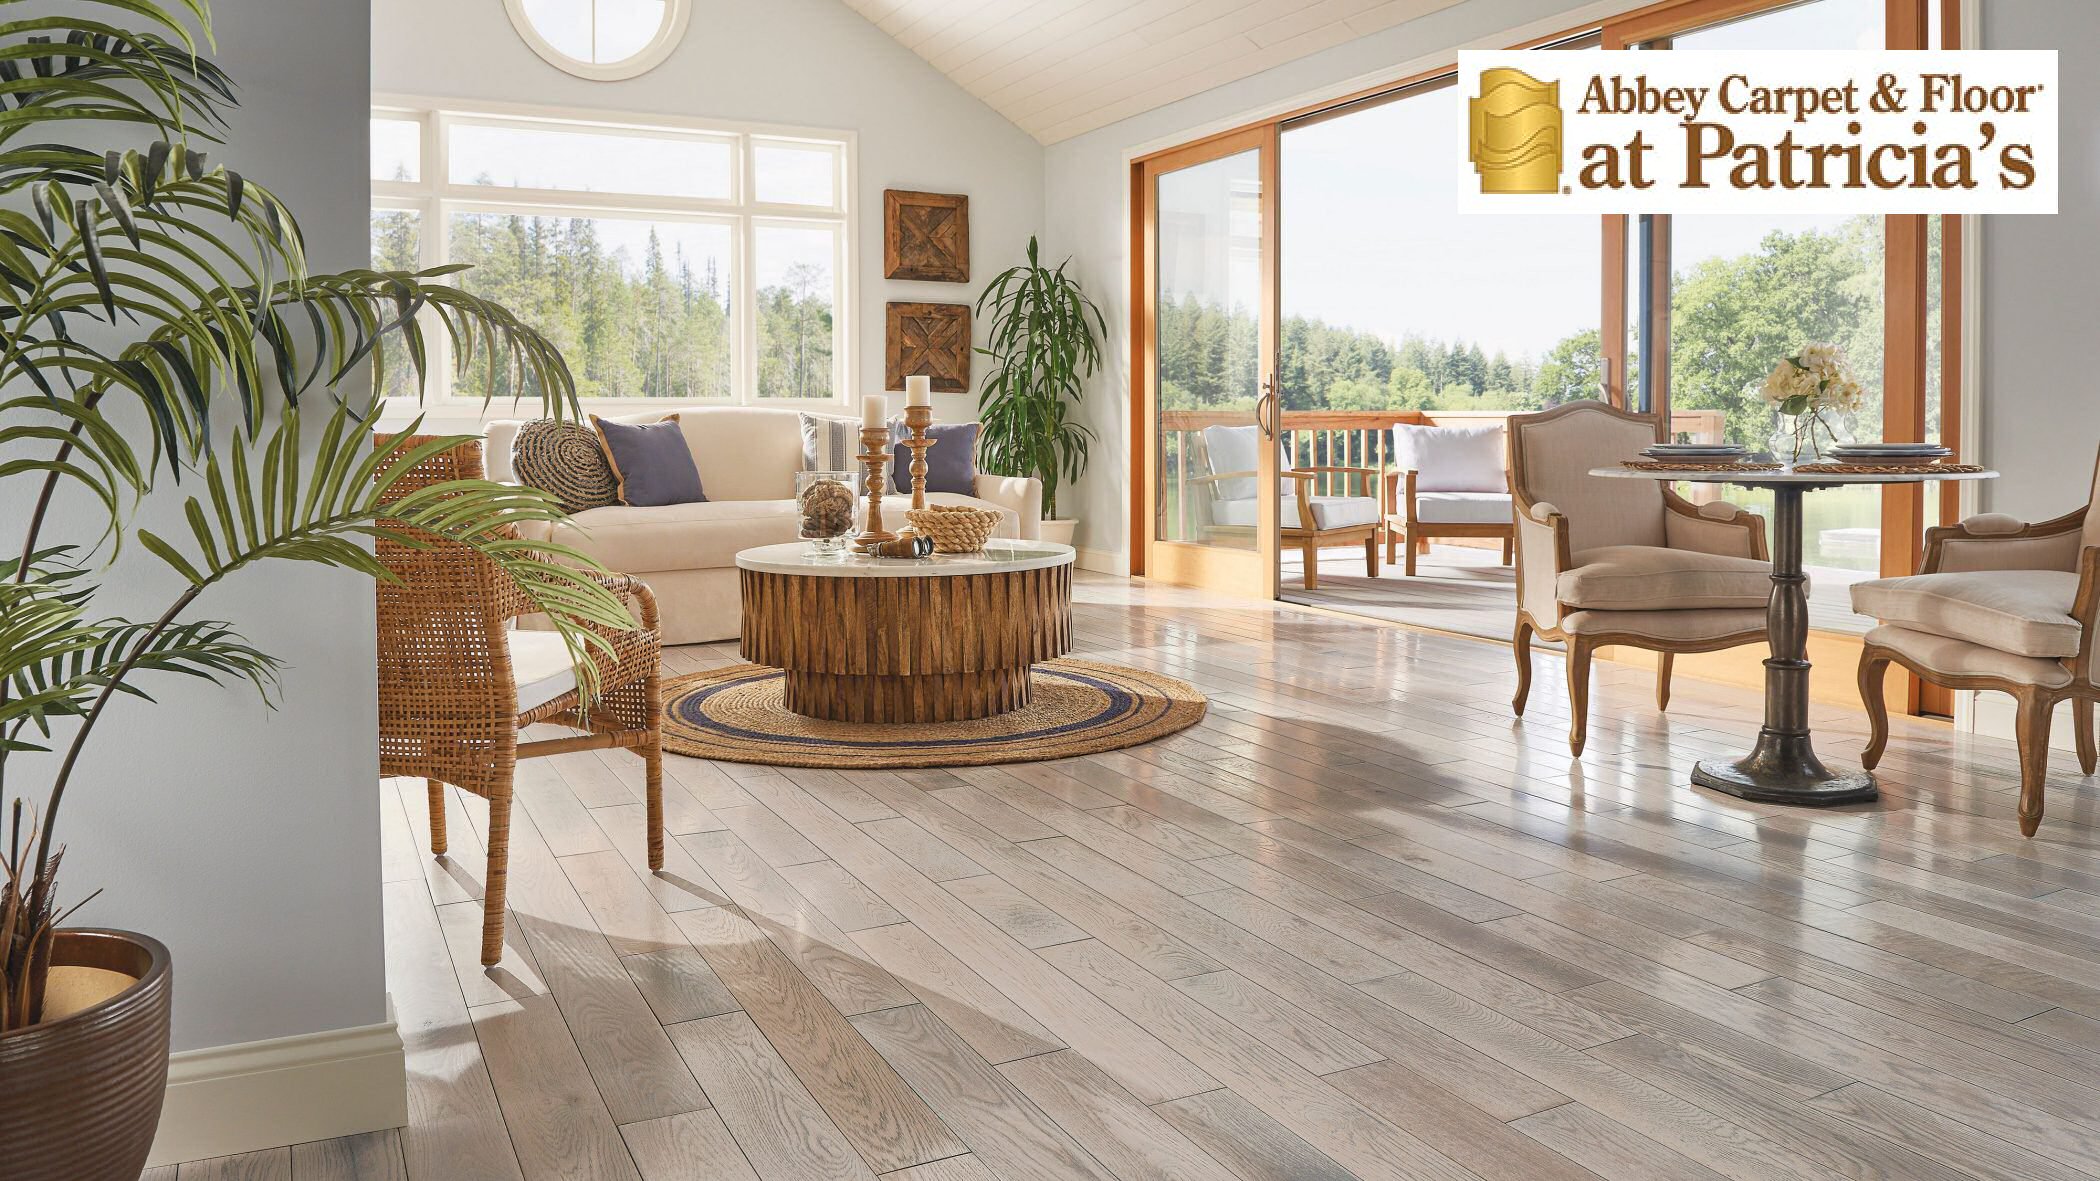 Abbey Carpet & Floor at Patricia's in Cape Coral, FL Offers the Ultimate Flooring Experience with Extensive Range of Luxury Vinyl Flooring Options